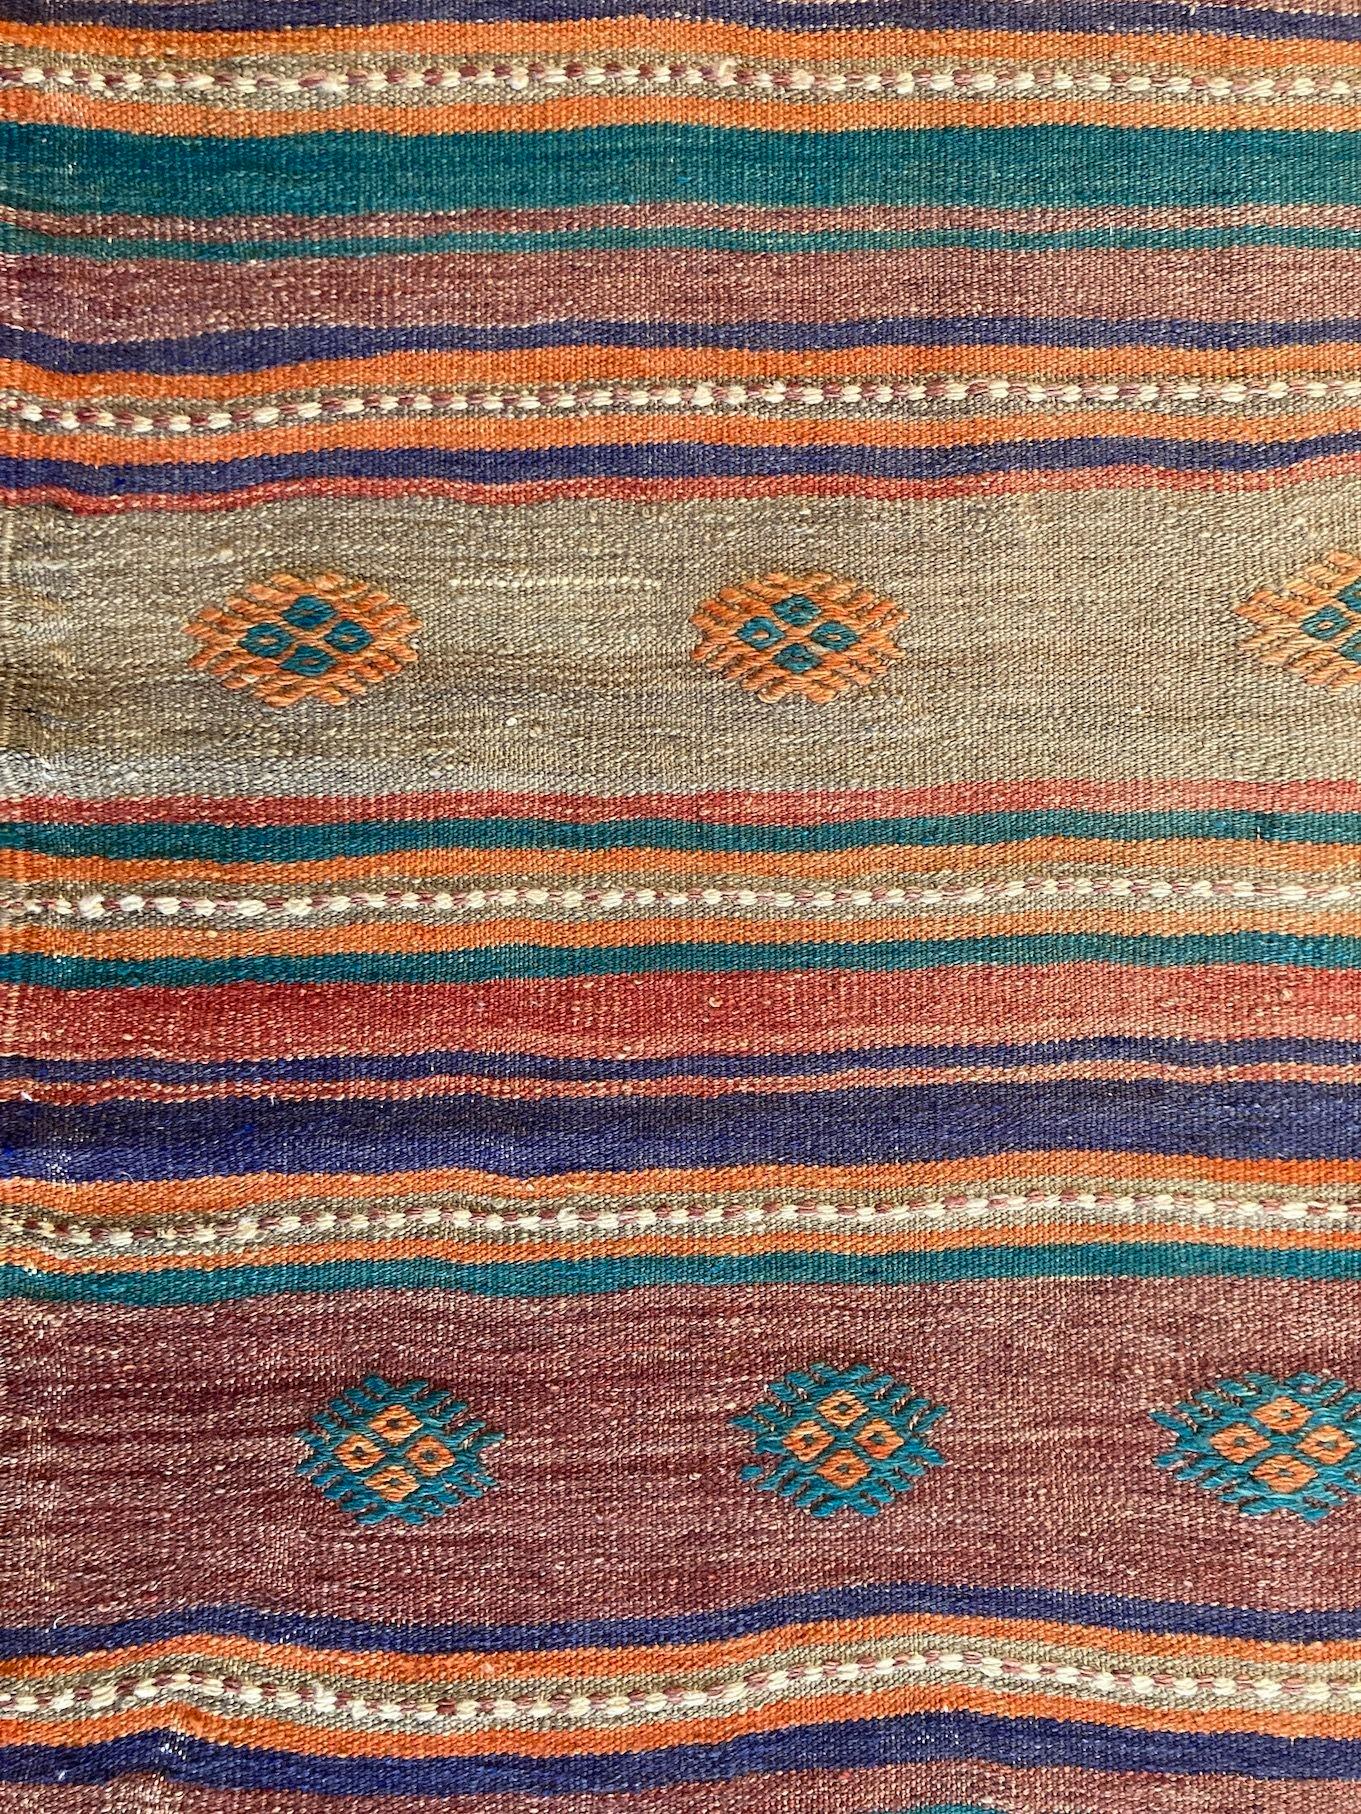 Vintage Anatolian Kilim 3.38m x 1.98m In Good Condition For Sale In St. Albans, GB